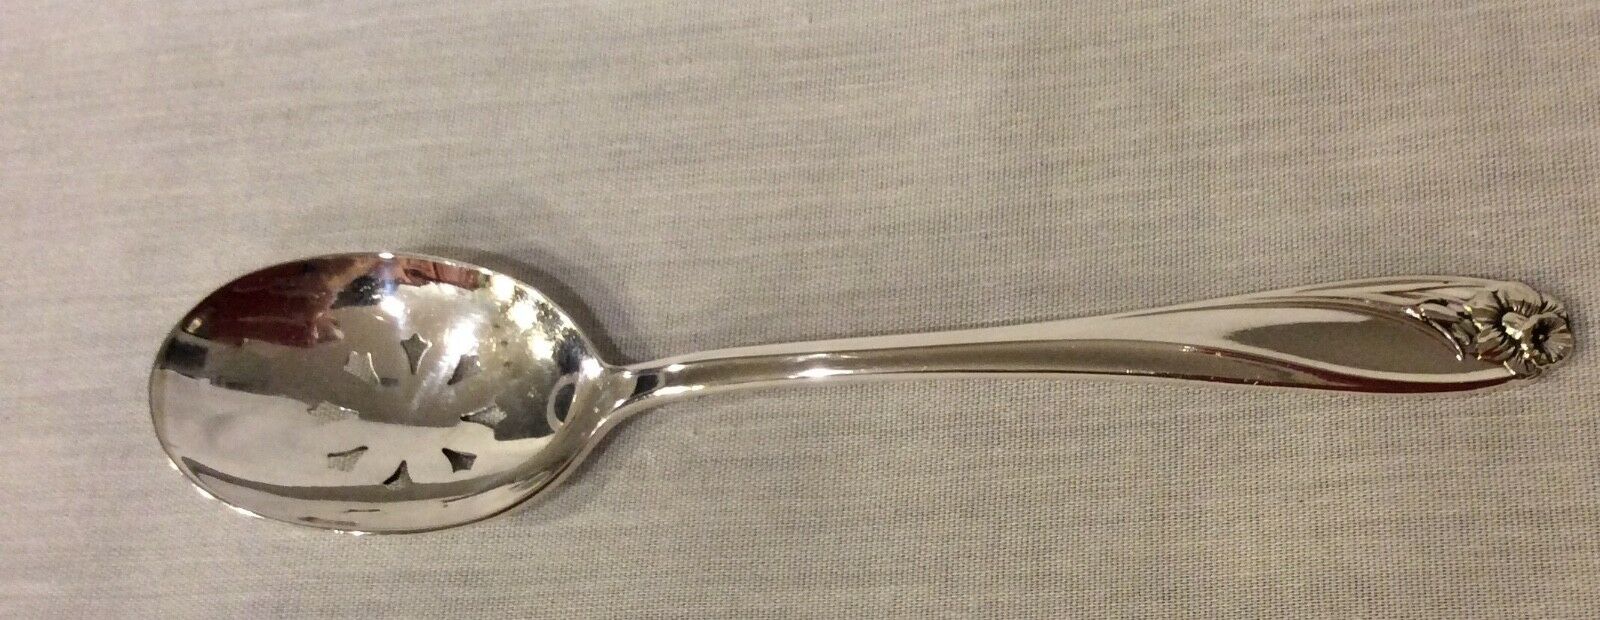 Reticulated Olive Spoon Vintage Rogers 1847 Silverplate Daffodil Pattern